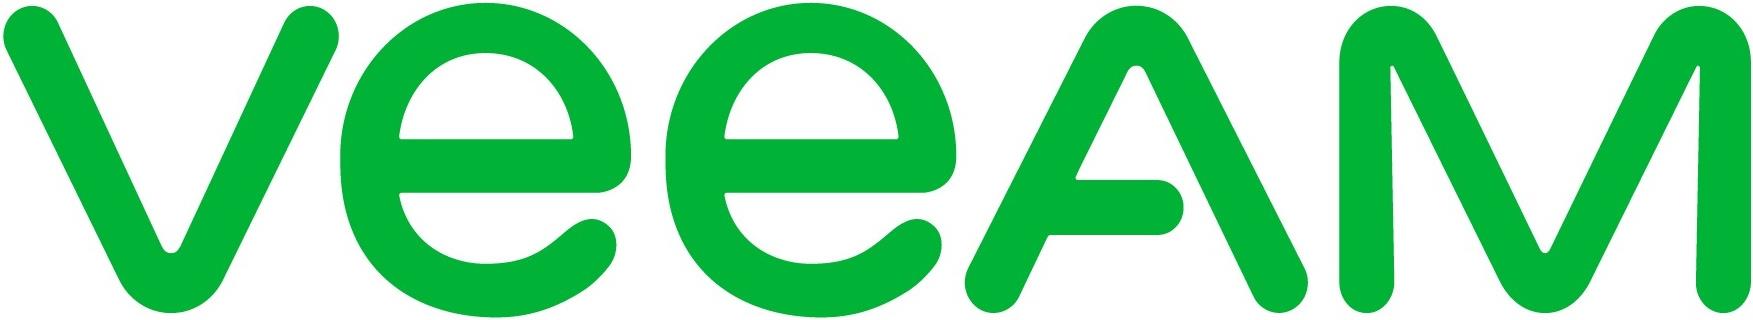 Veeam Data Platform Essentials Universal Subscription License. Includes Enterprise Plus Edition features. - 4 Years Renewal Subscription Upfront Billing & Production (24/7) Support. 50 instance pack. (V-ESSVUL-50-PS4AA-6S)